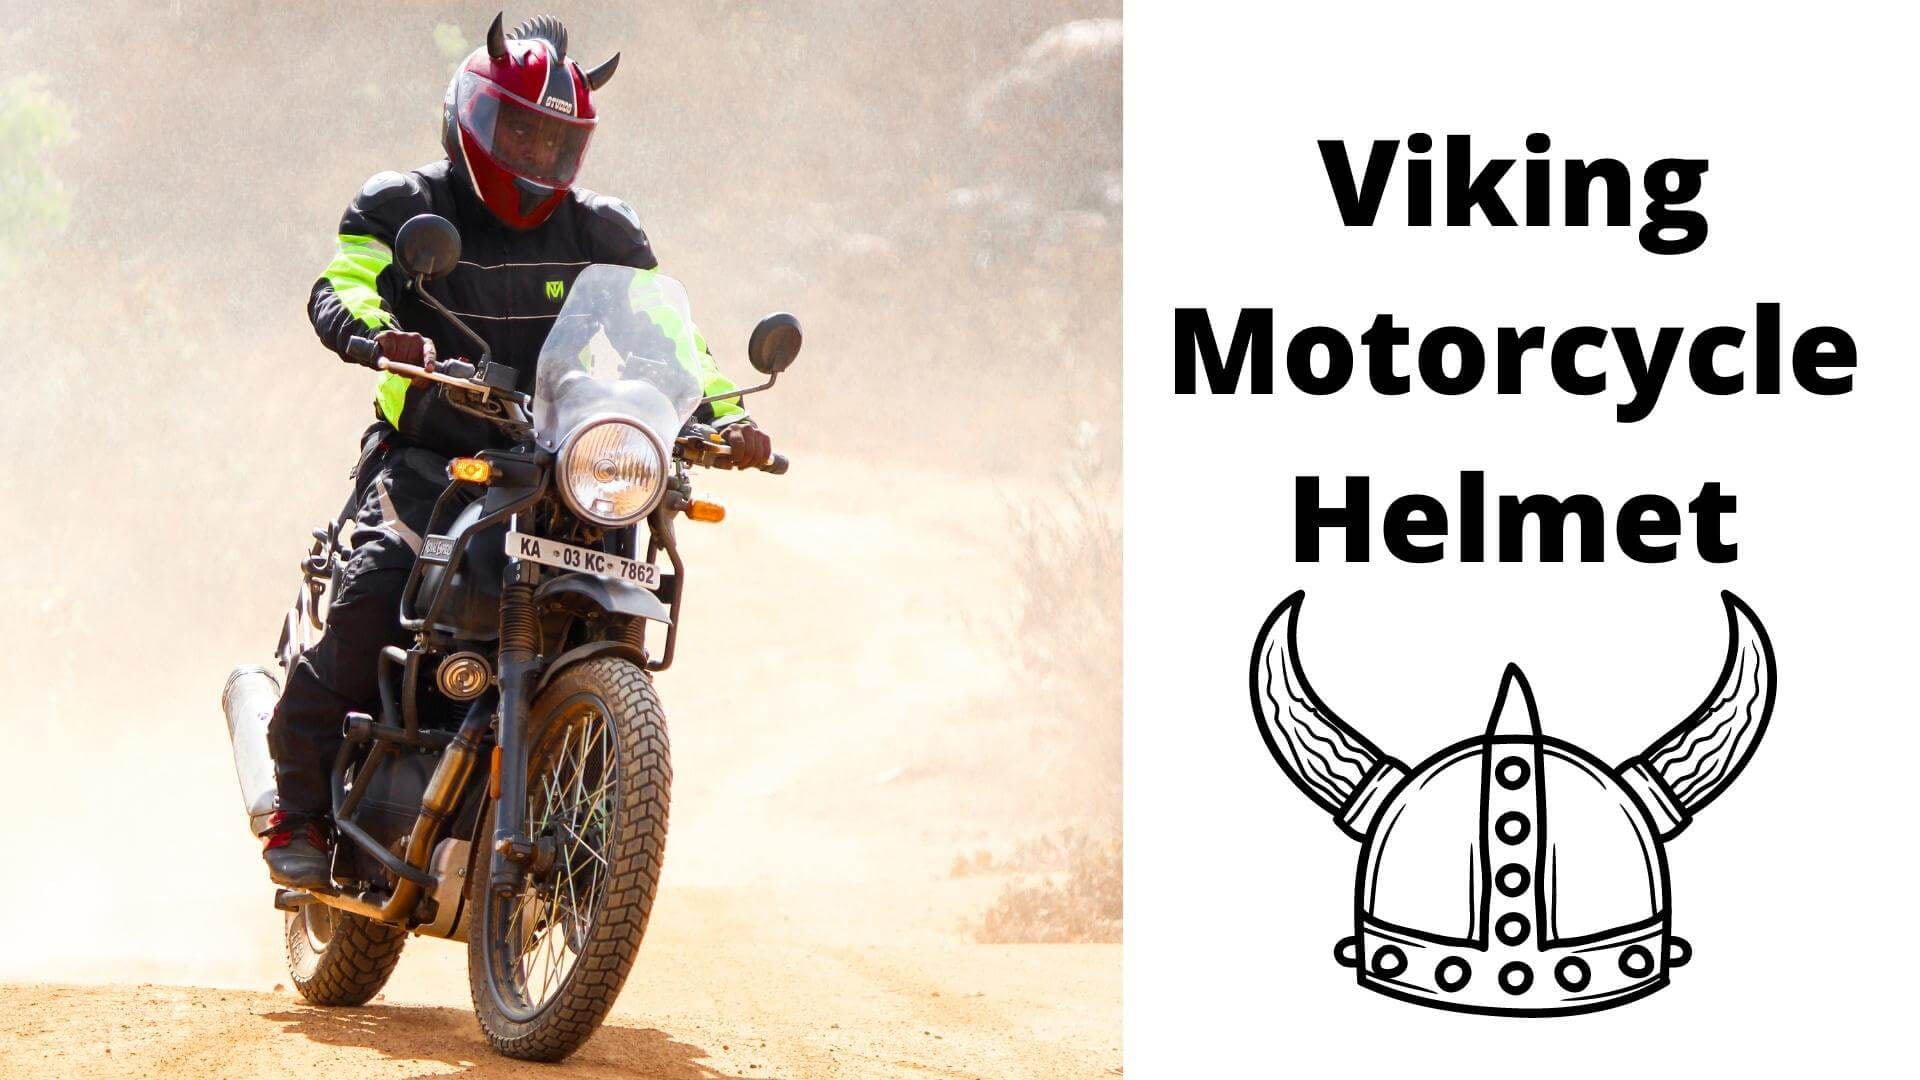 Viking Motorcycle Helmet | The Ultimate Safety Gear For Riders